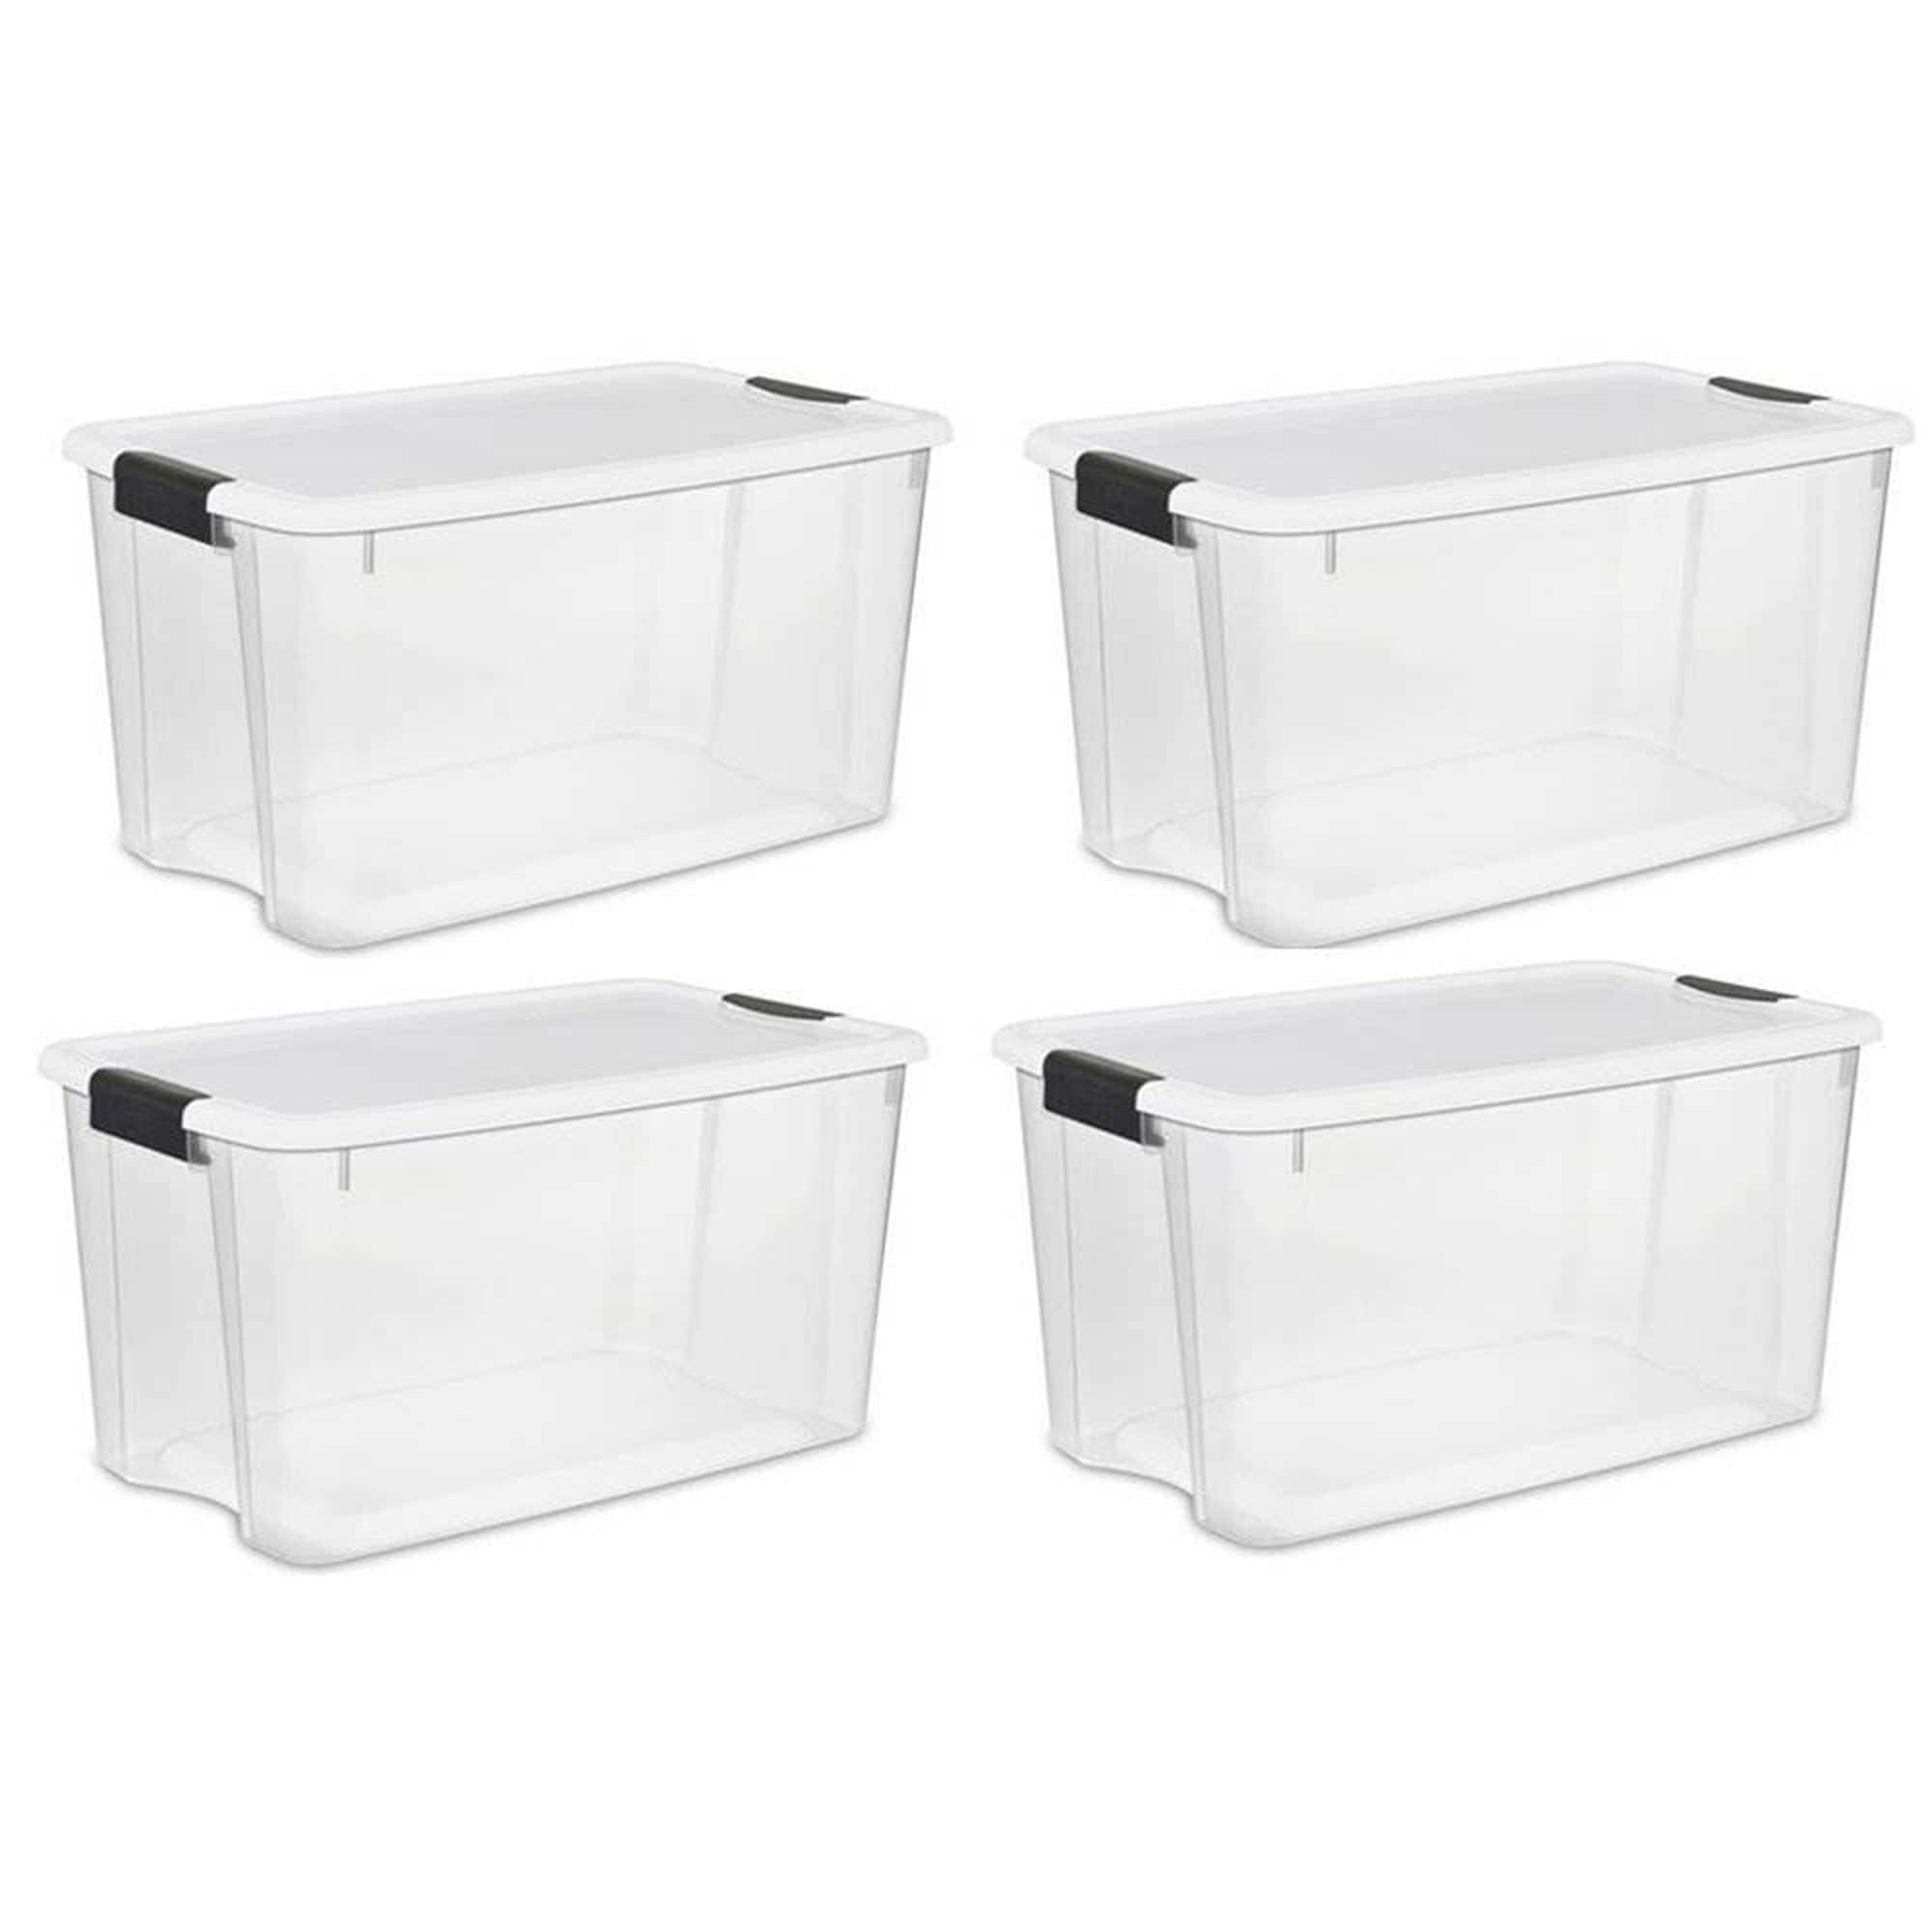 https://ak1.ostkcdn.com/images/products/is/images/direct/a4ced3e8a458332812ce0ff064cd2efa238c28d6/Sterilite-70-Qt-Clear-Plastic-Stackable-Storage-Bin-with-Latching-Lid%2C-%284-Pack%29.jpg